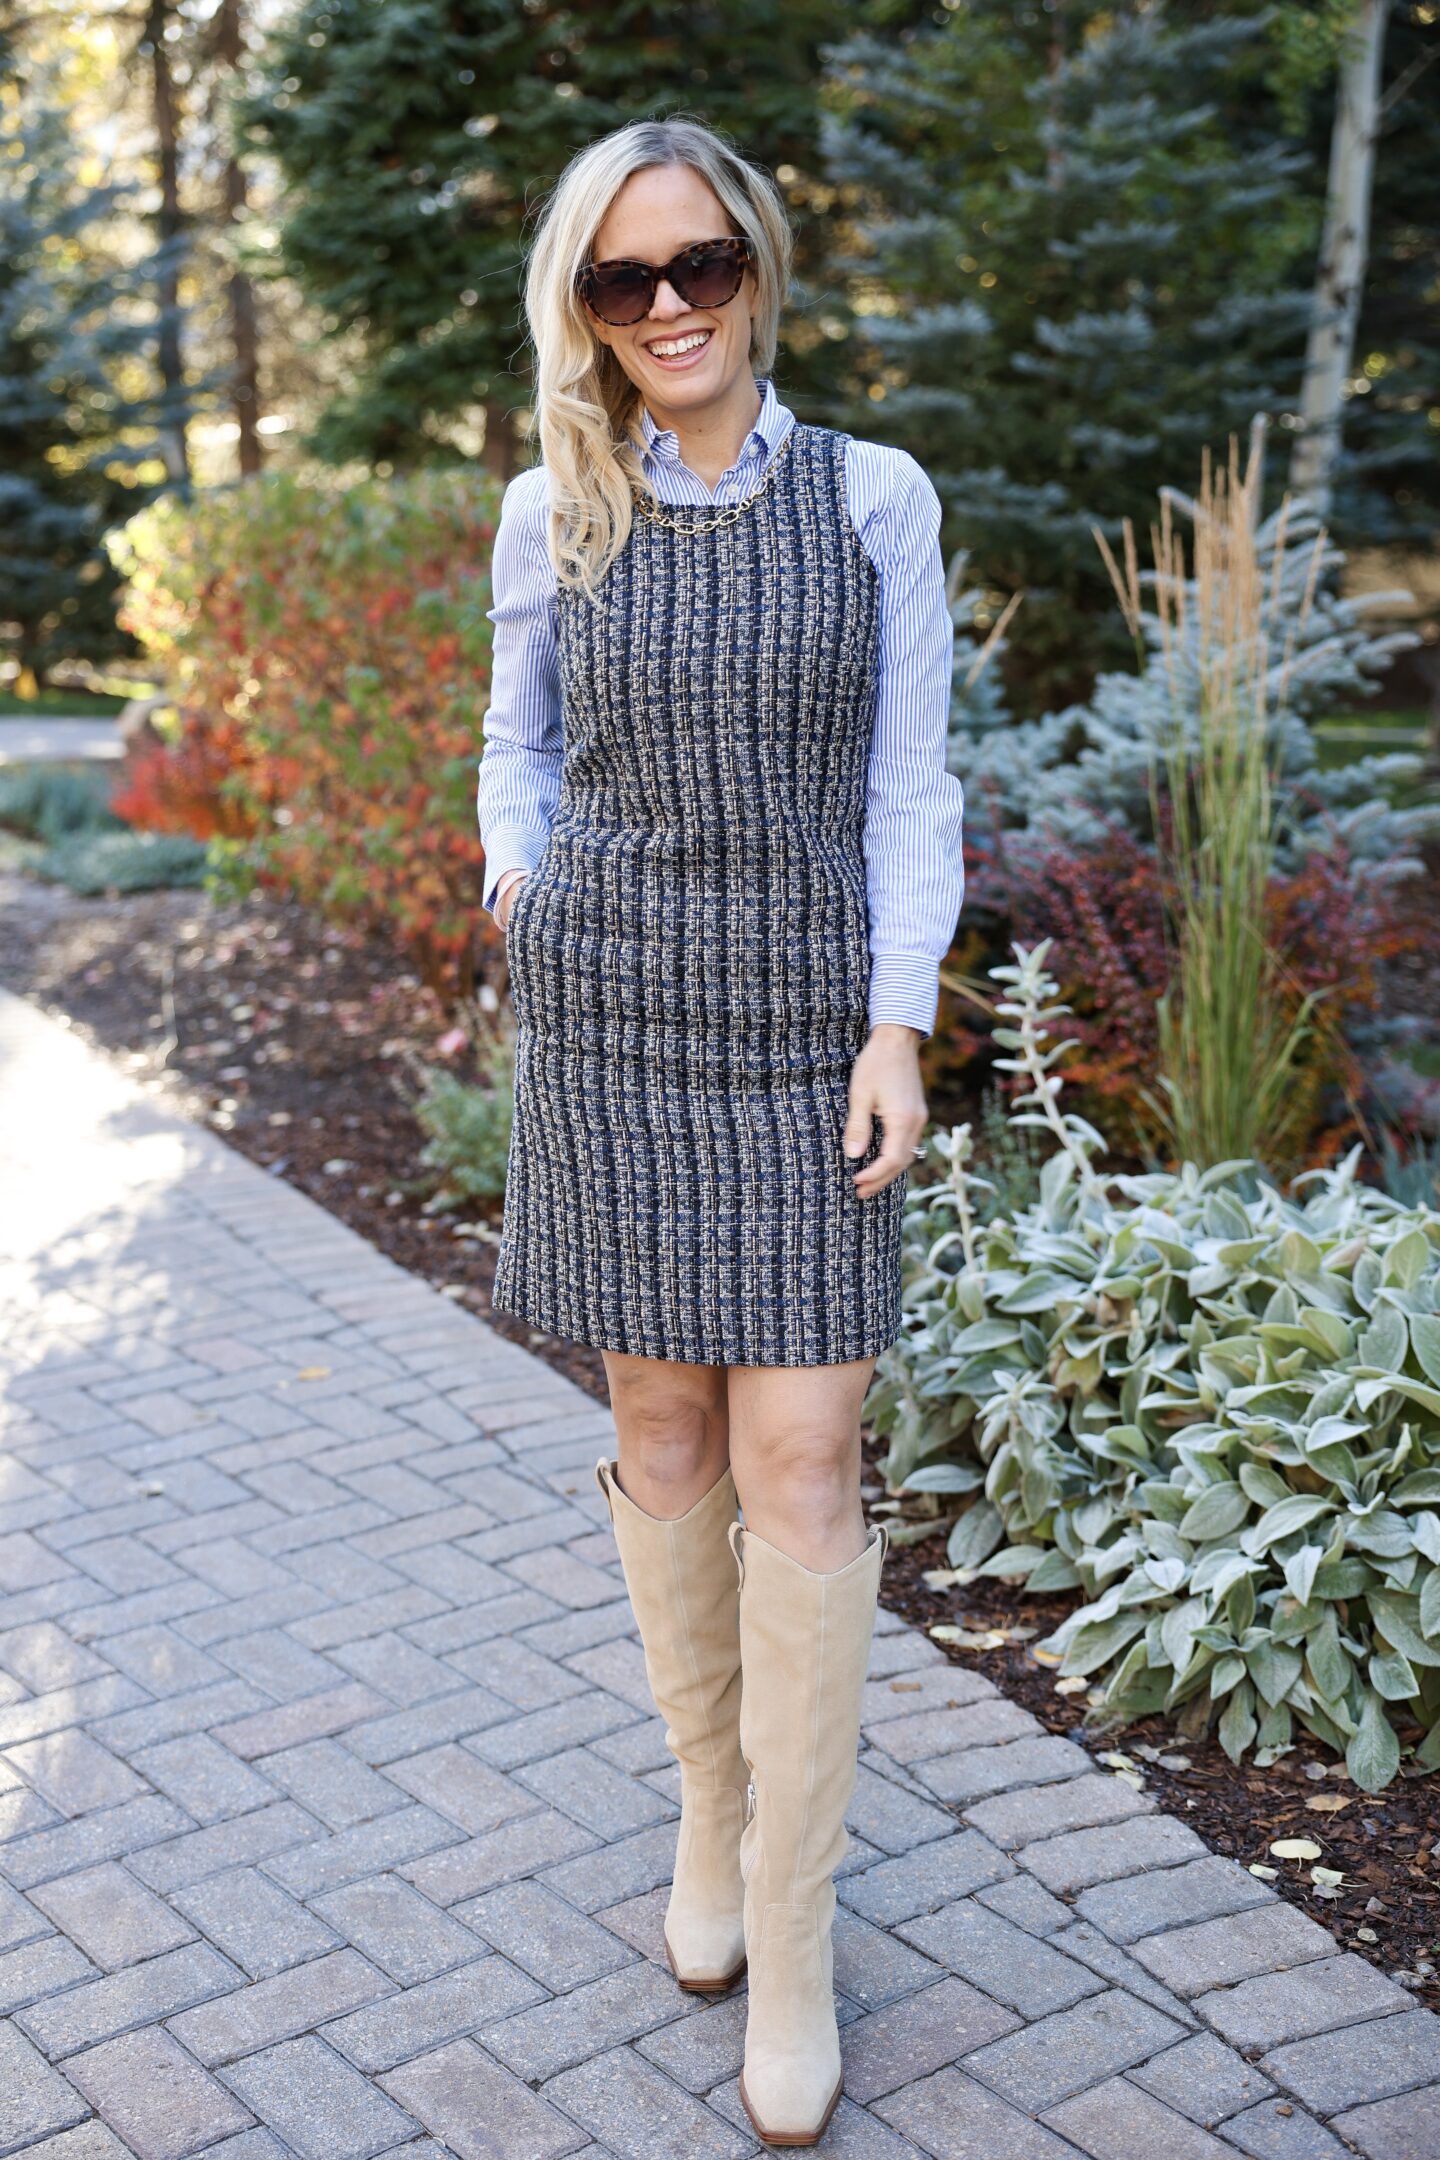 Tweed Dress: Style a Tweed Dress Two Ways | Layer a tweed dress with a striped shirt